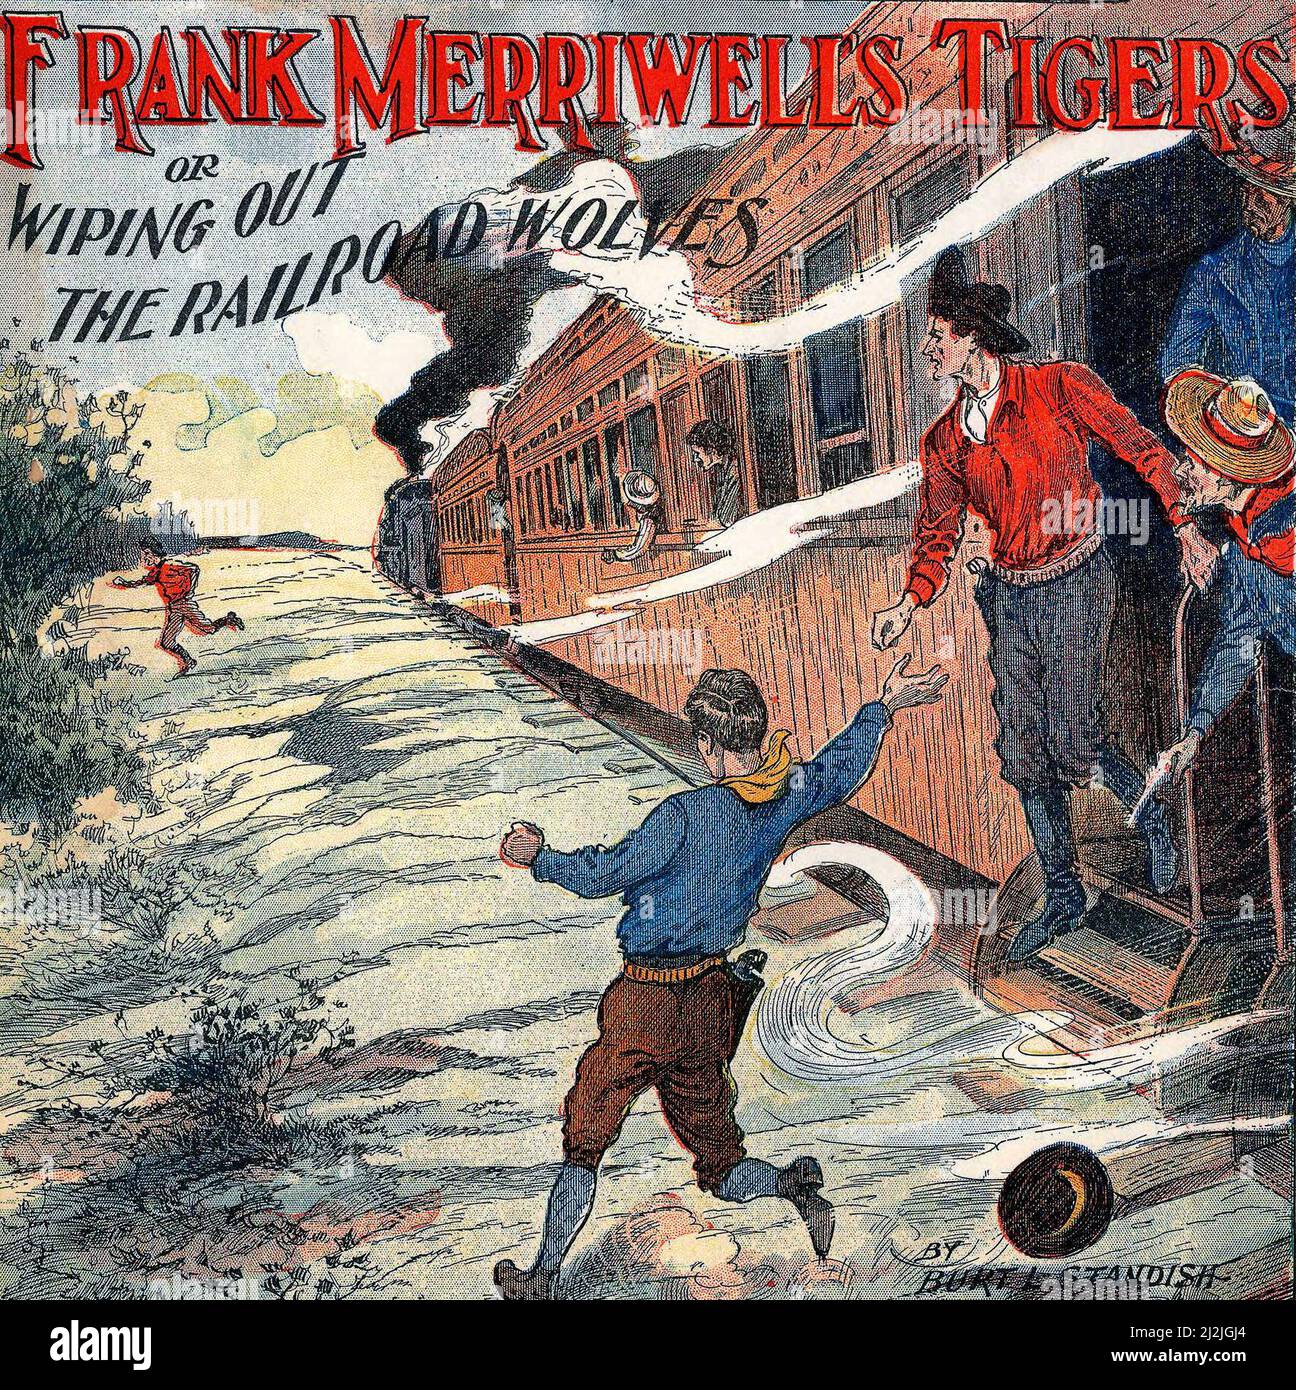 Tigres de Frank Merriwell, Or, Wiping Out the Railroad Wolves, 1905 Banque D'Images